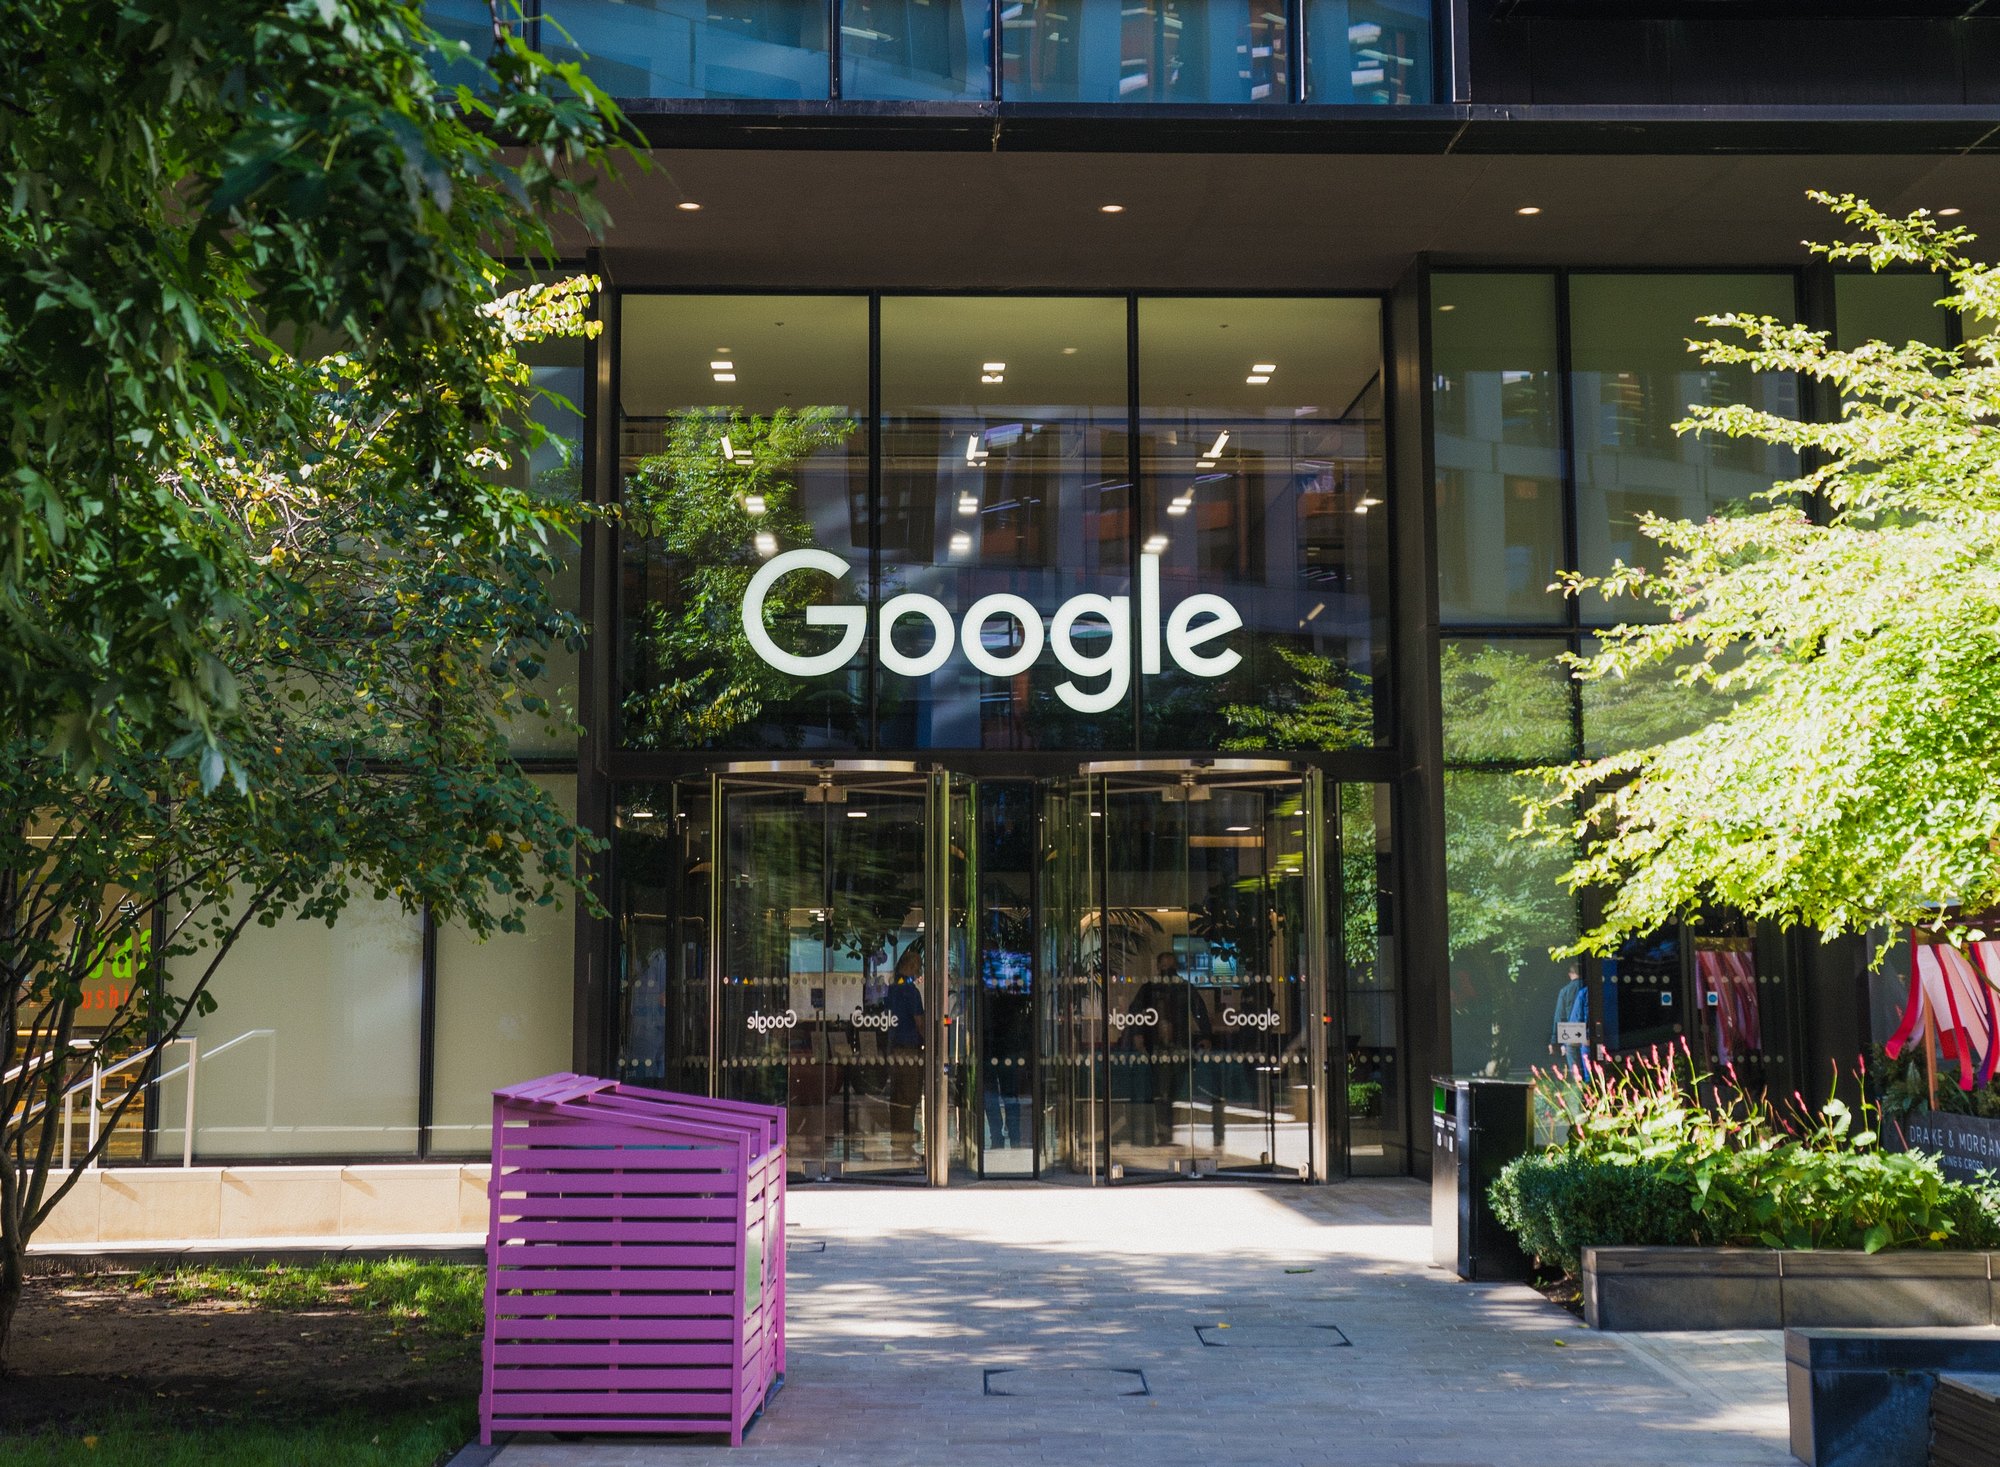 Google faces lawsuits in the UK and EU seeking £21.6bn in damages